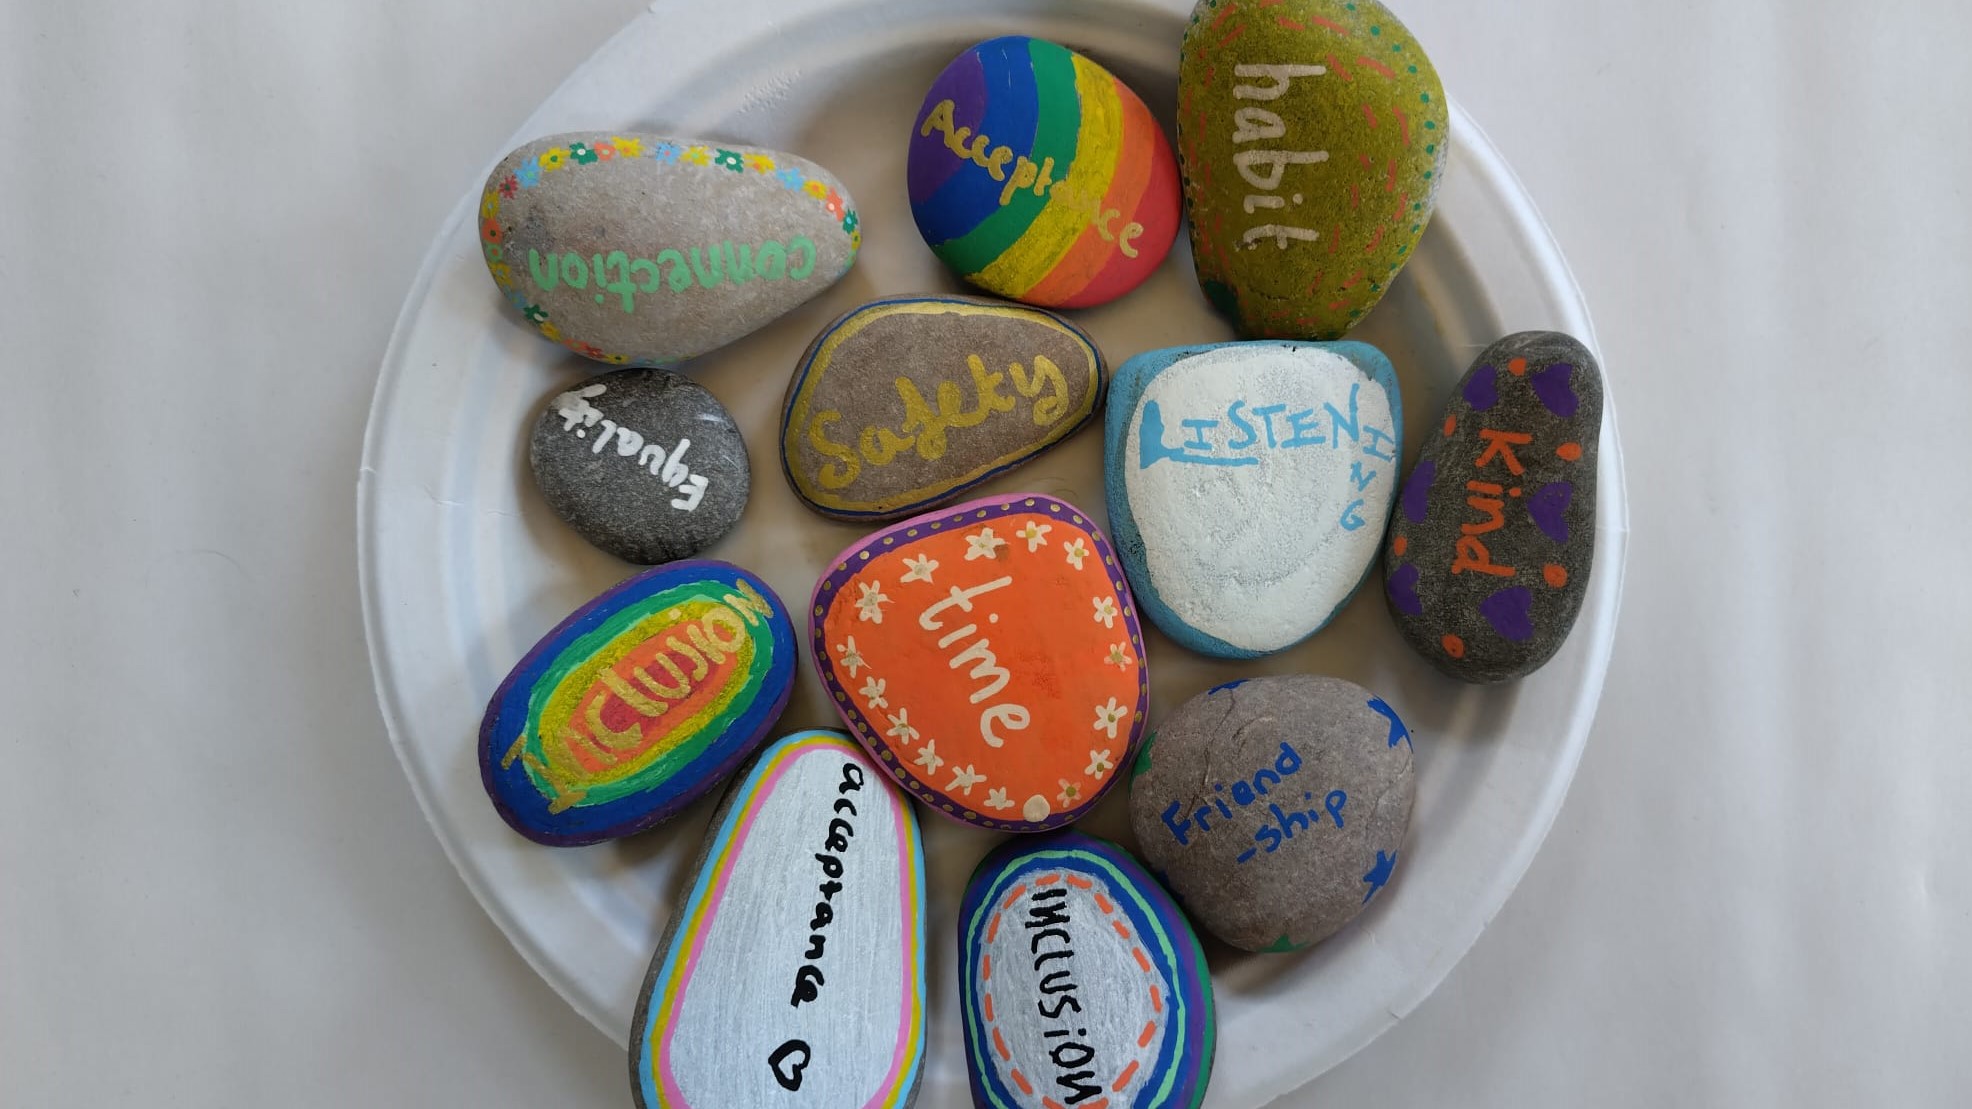 Stones on a plate, each stone decorated with colourful words and patterns